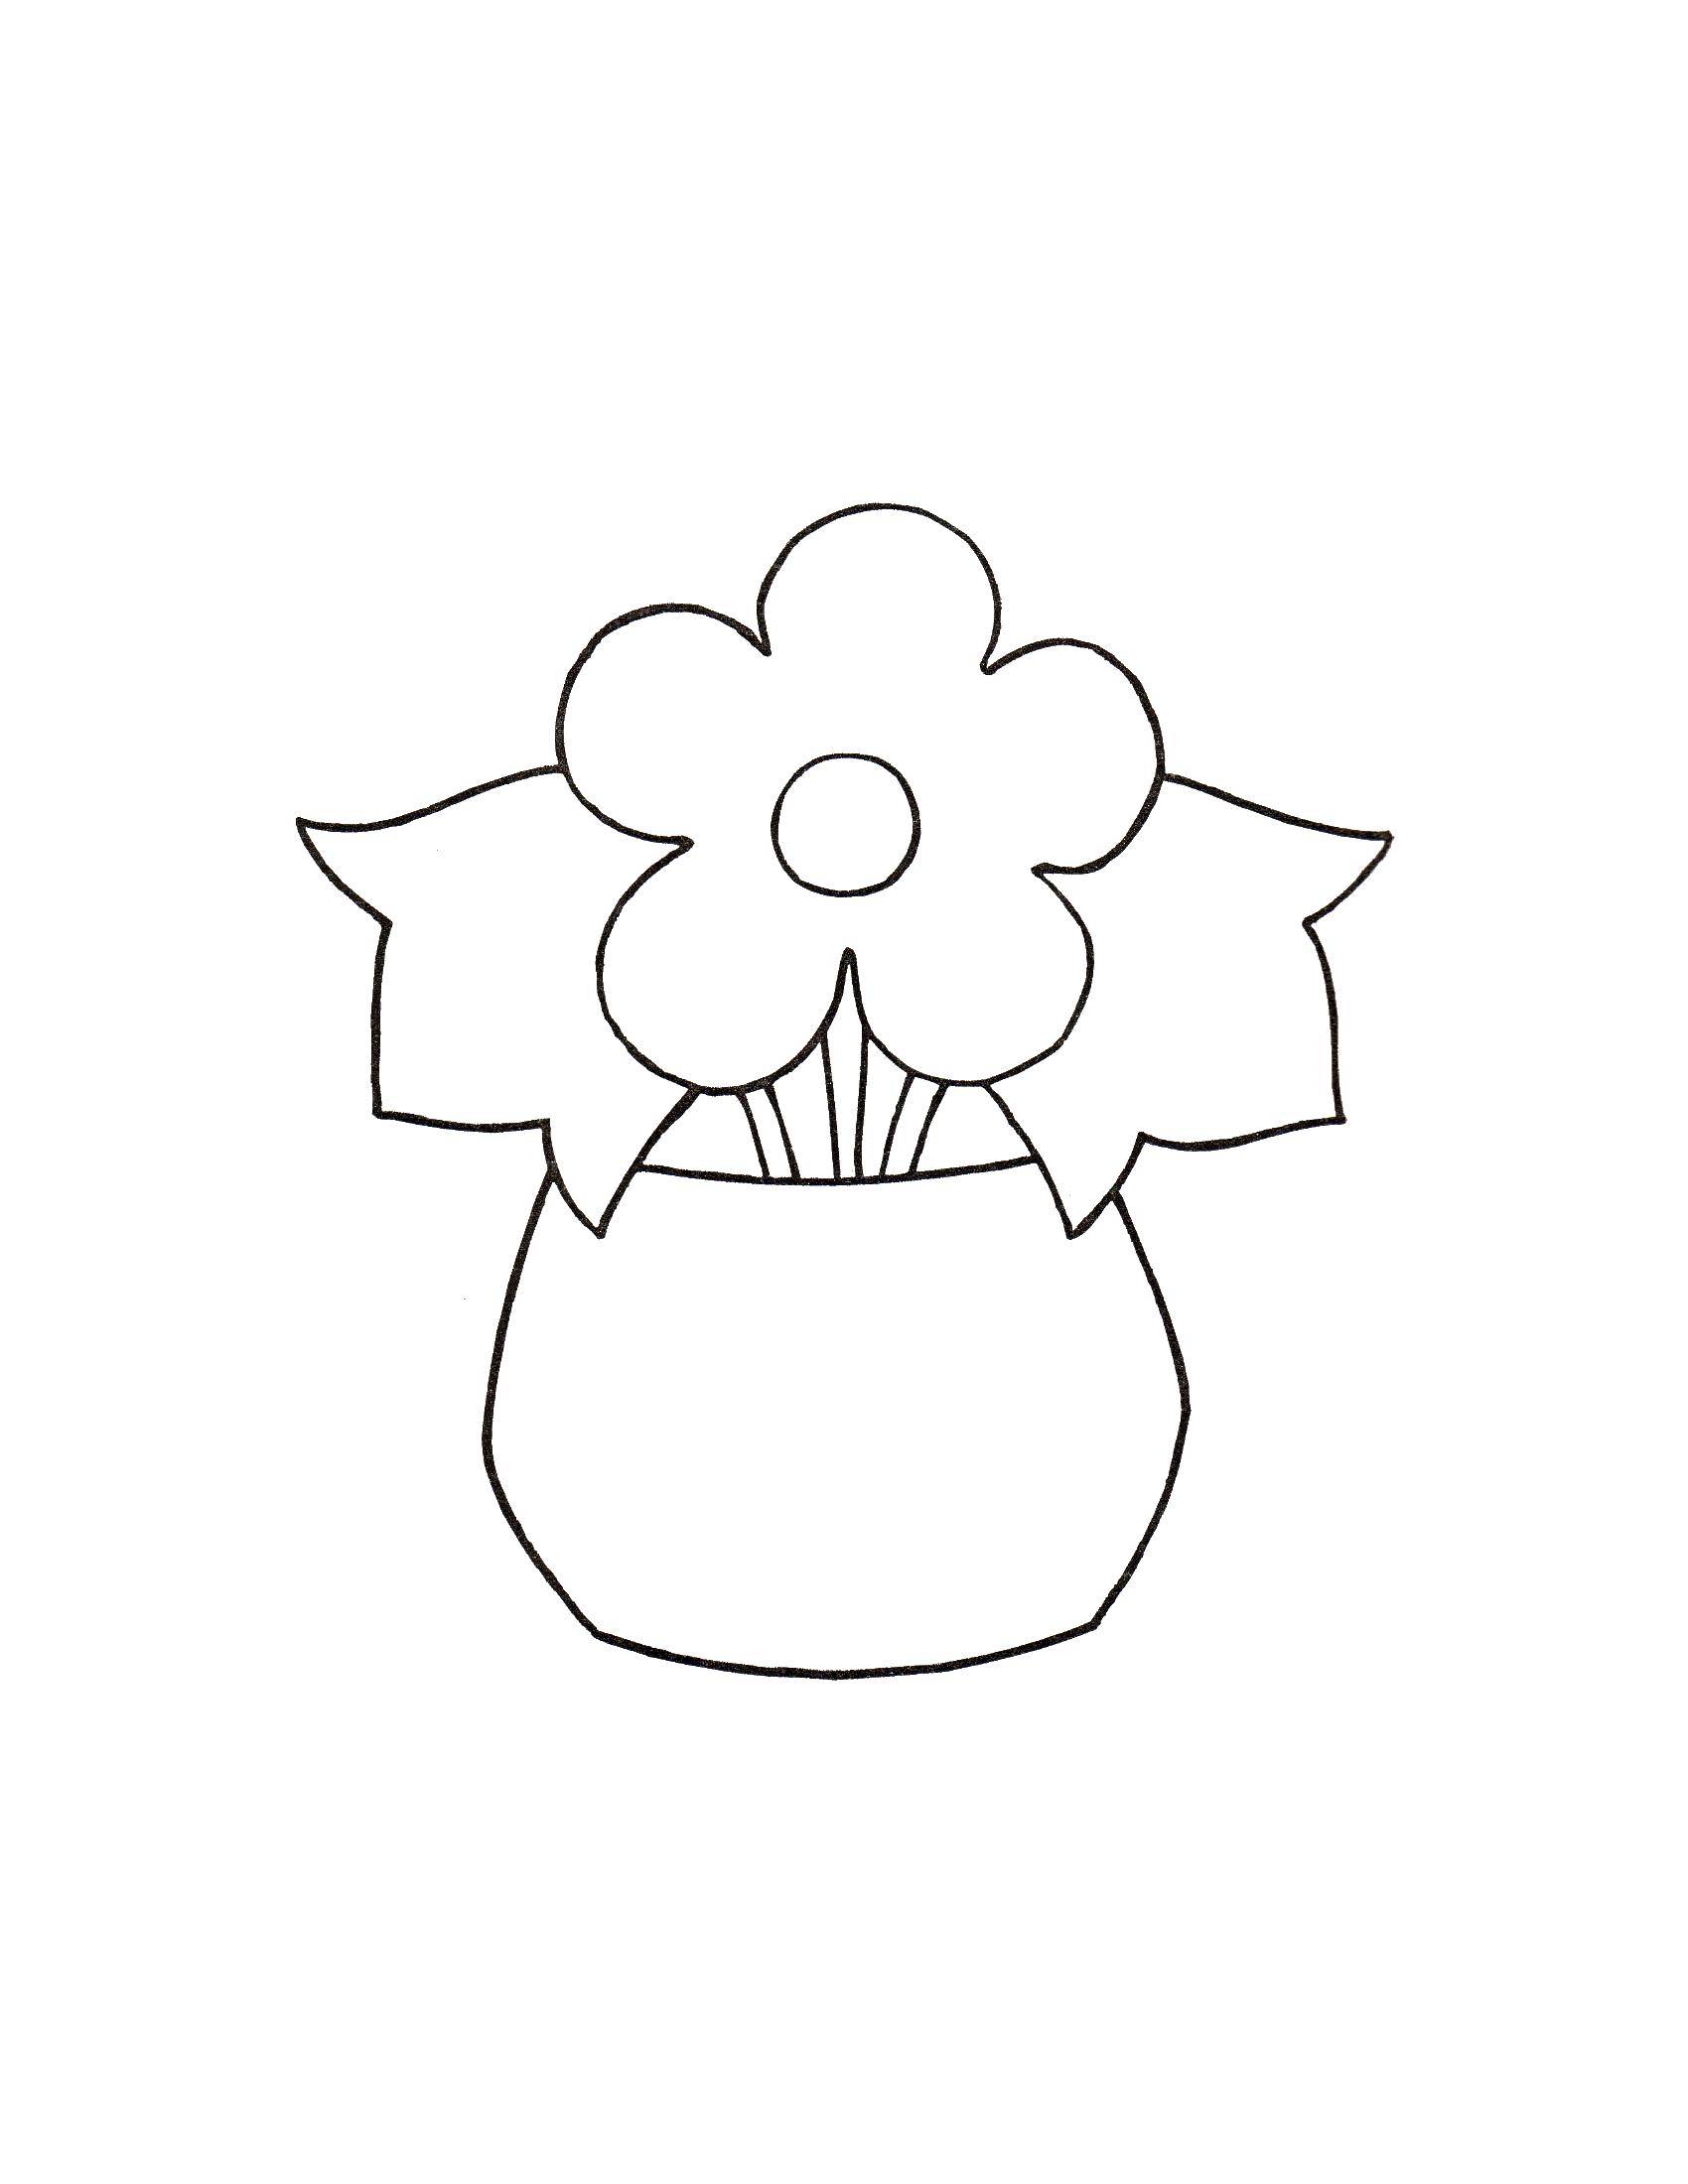 Coloring Flowers in pot. Category flowers. Tags:  flowers.